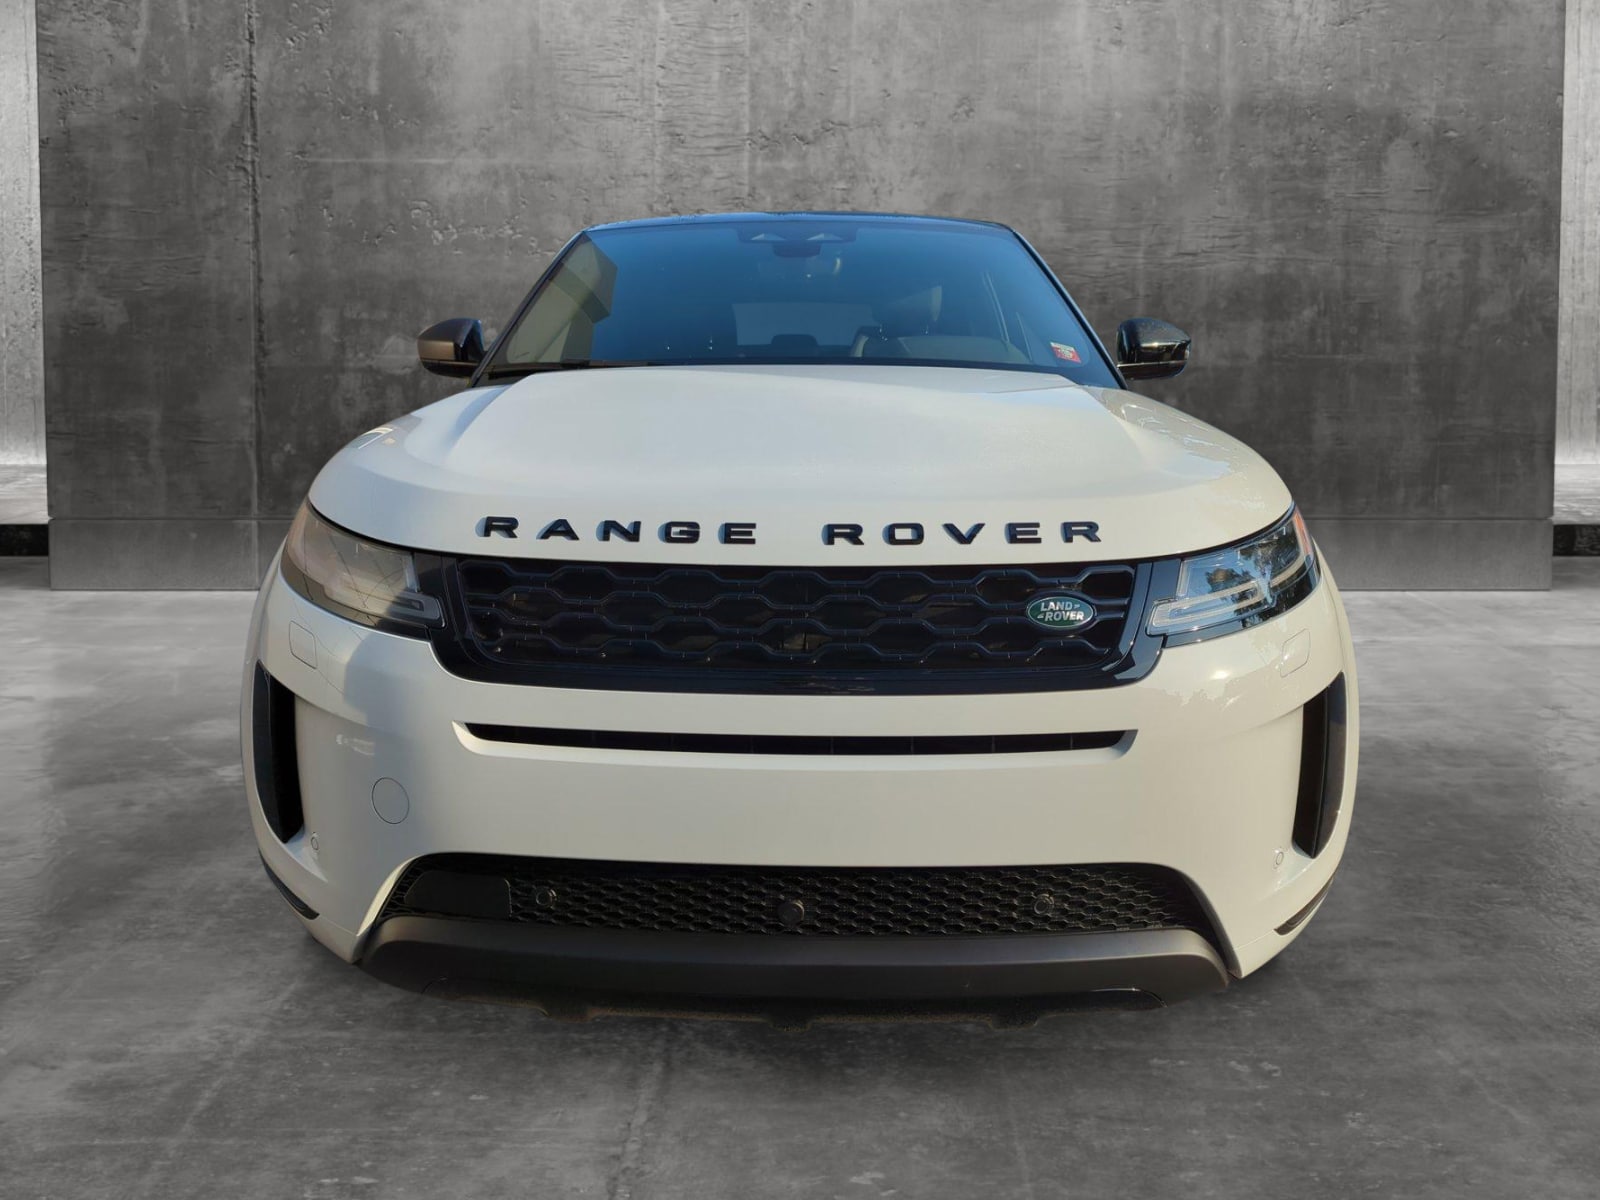 New 2023 Land Rover Range Rover Evoque For Sale at Land Rover New 